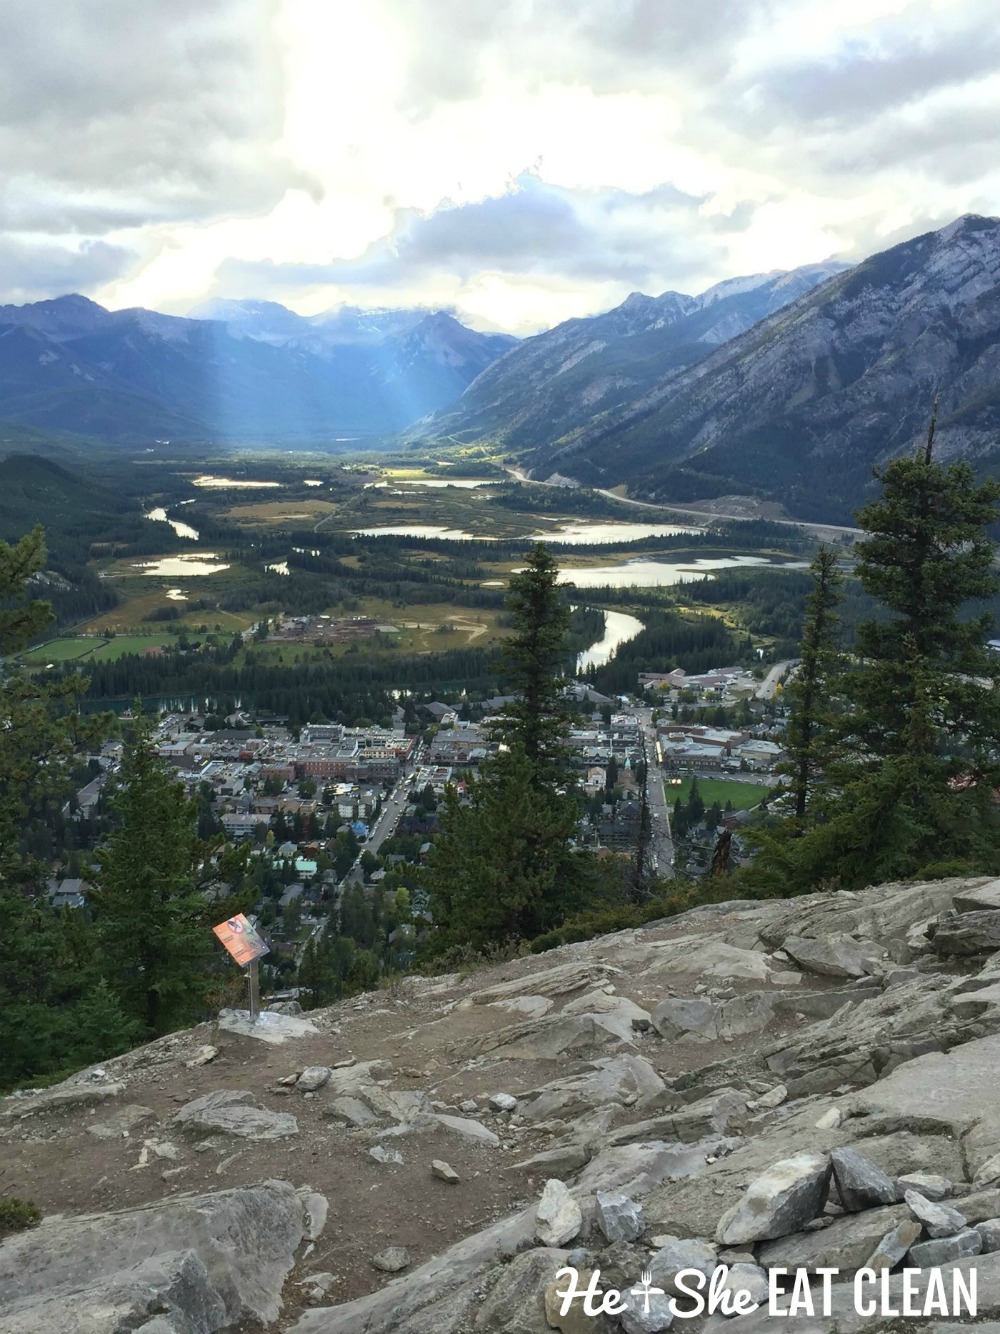 view of city (Banff) from above on Tunnel Mountain